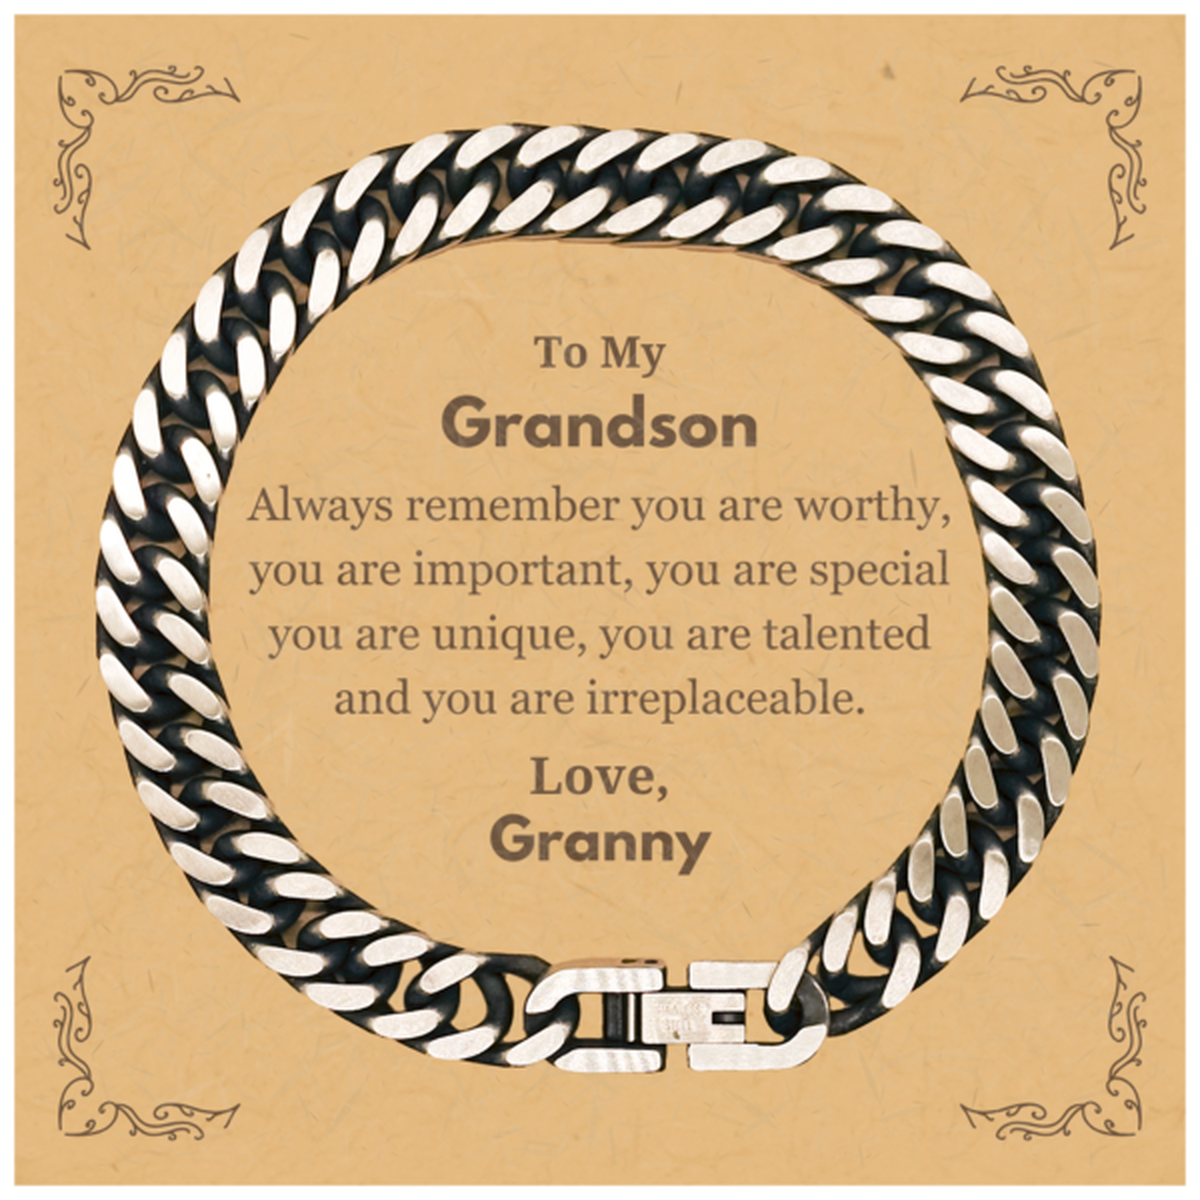 Grandson Birthday Gifts from Granny, Inspirational Cuban Link Chain Bracelet for Grandson Christmas Graduation Gifts for Grandson Always remember you are worthy, you are important. Love, Granny